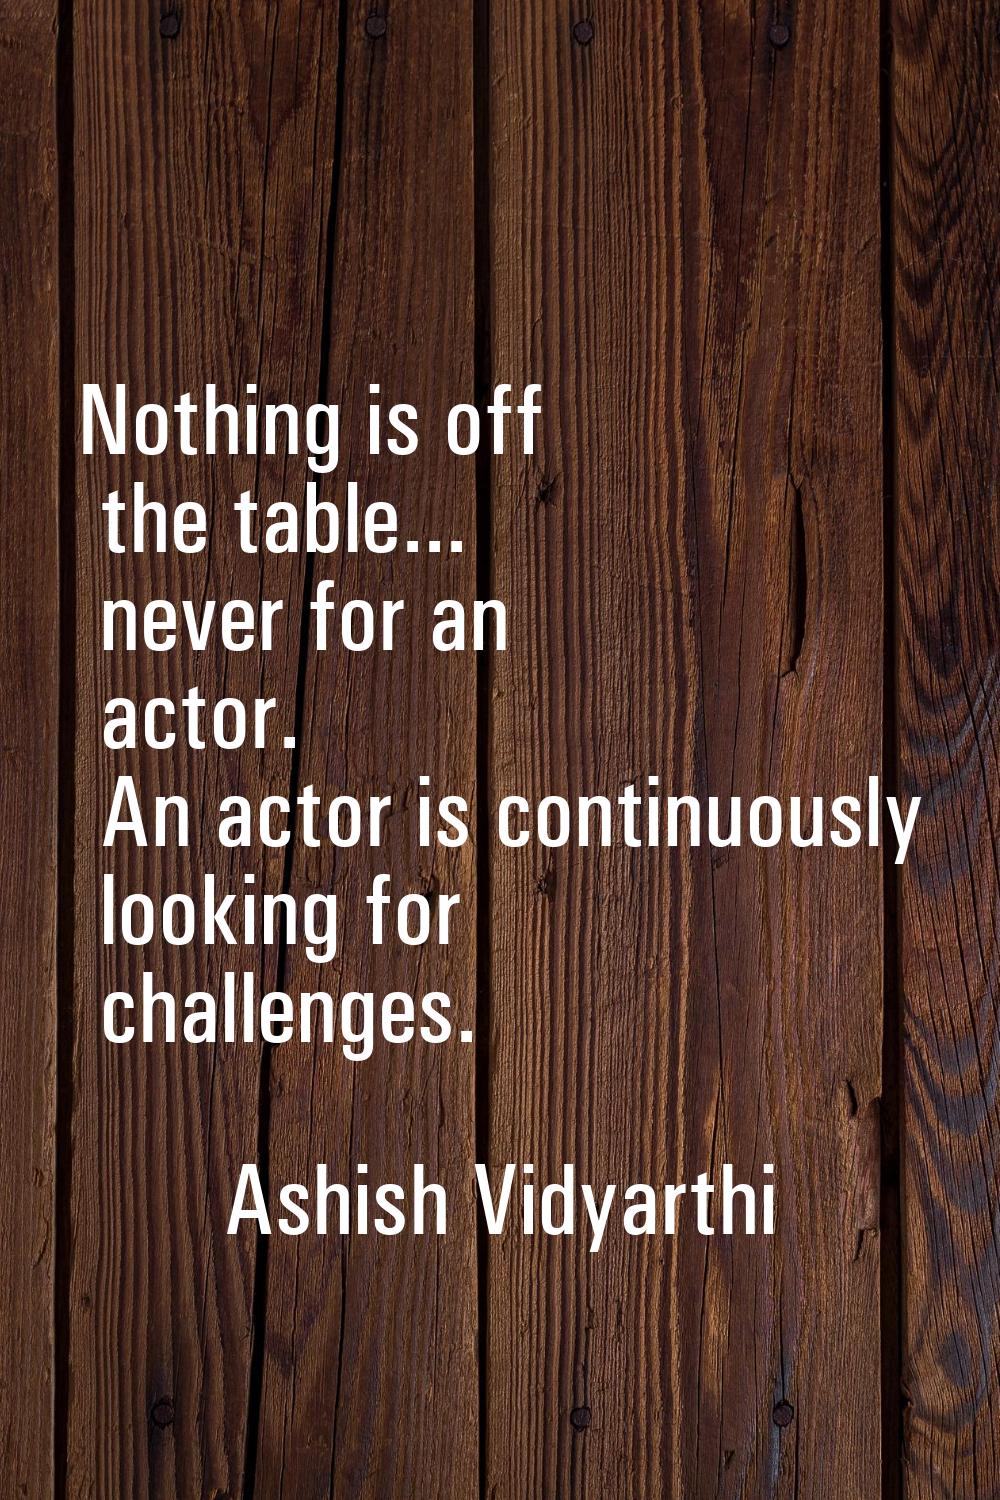 Nothing is off the table... never for an actor. An actor is continuously looking for challenges.